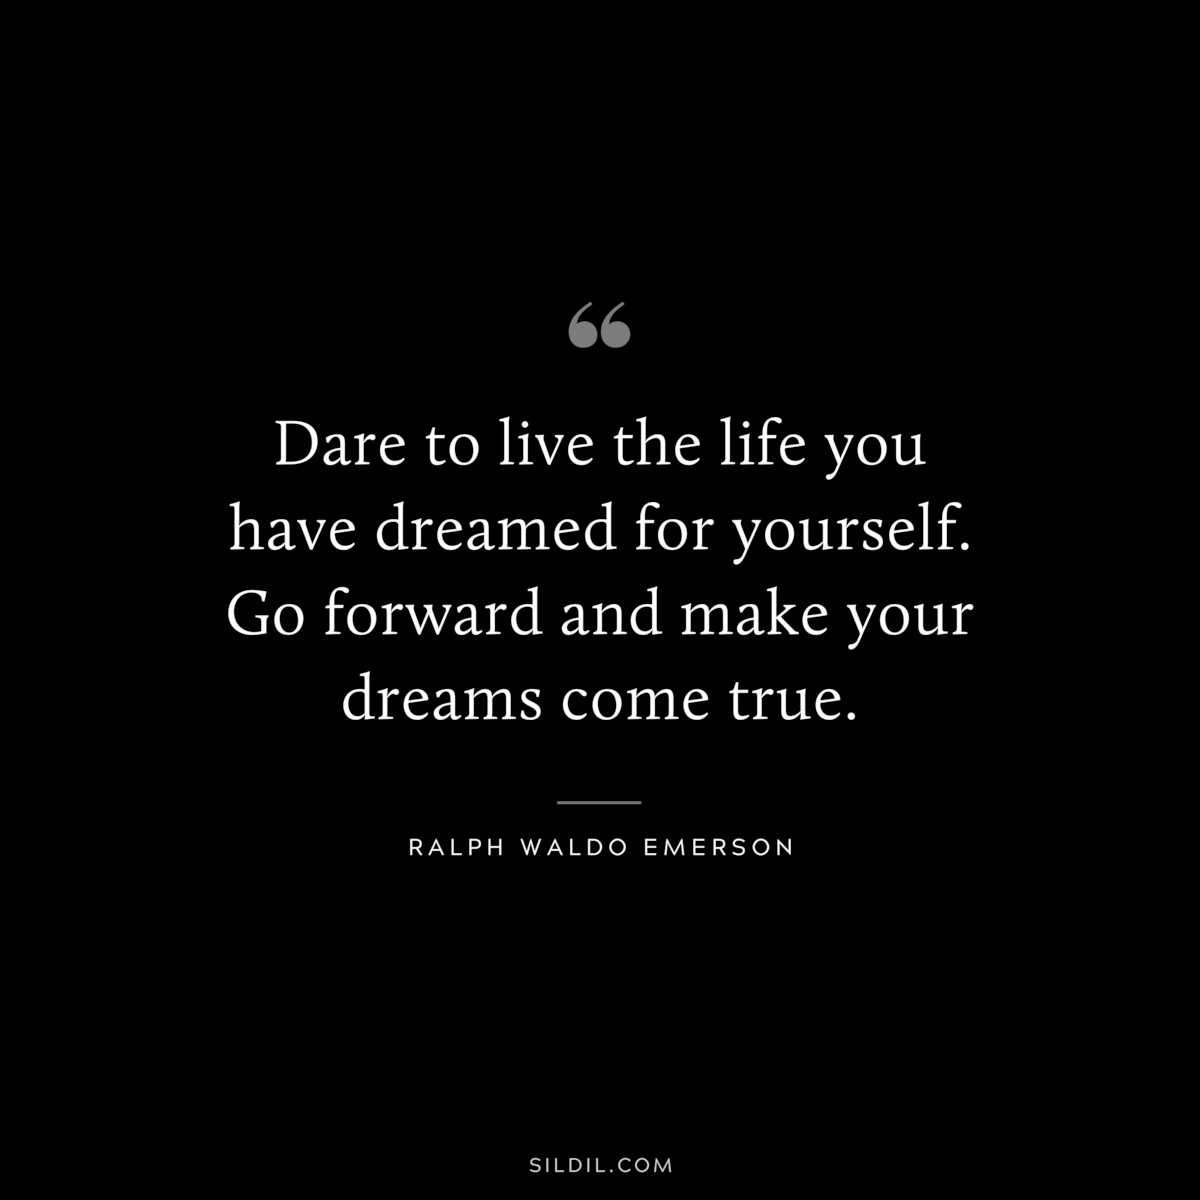 Dare to live the life you have dreamed for yourself. Go forward and make your dreams come true. — Ralph Waldo Emerson